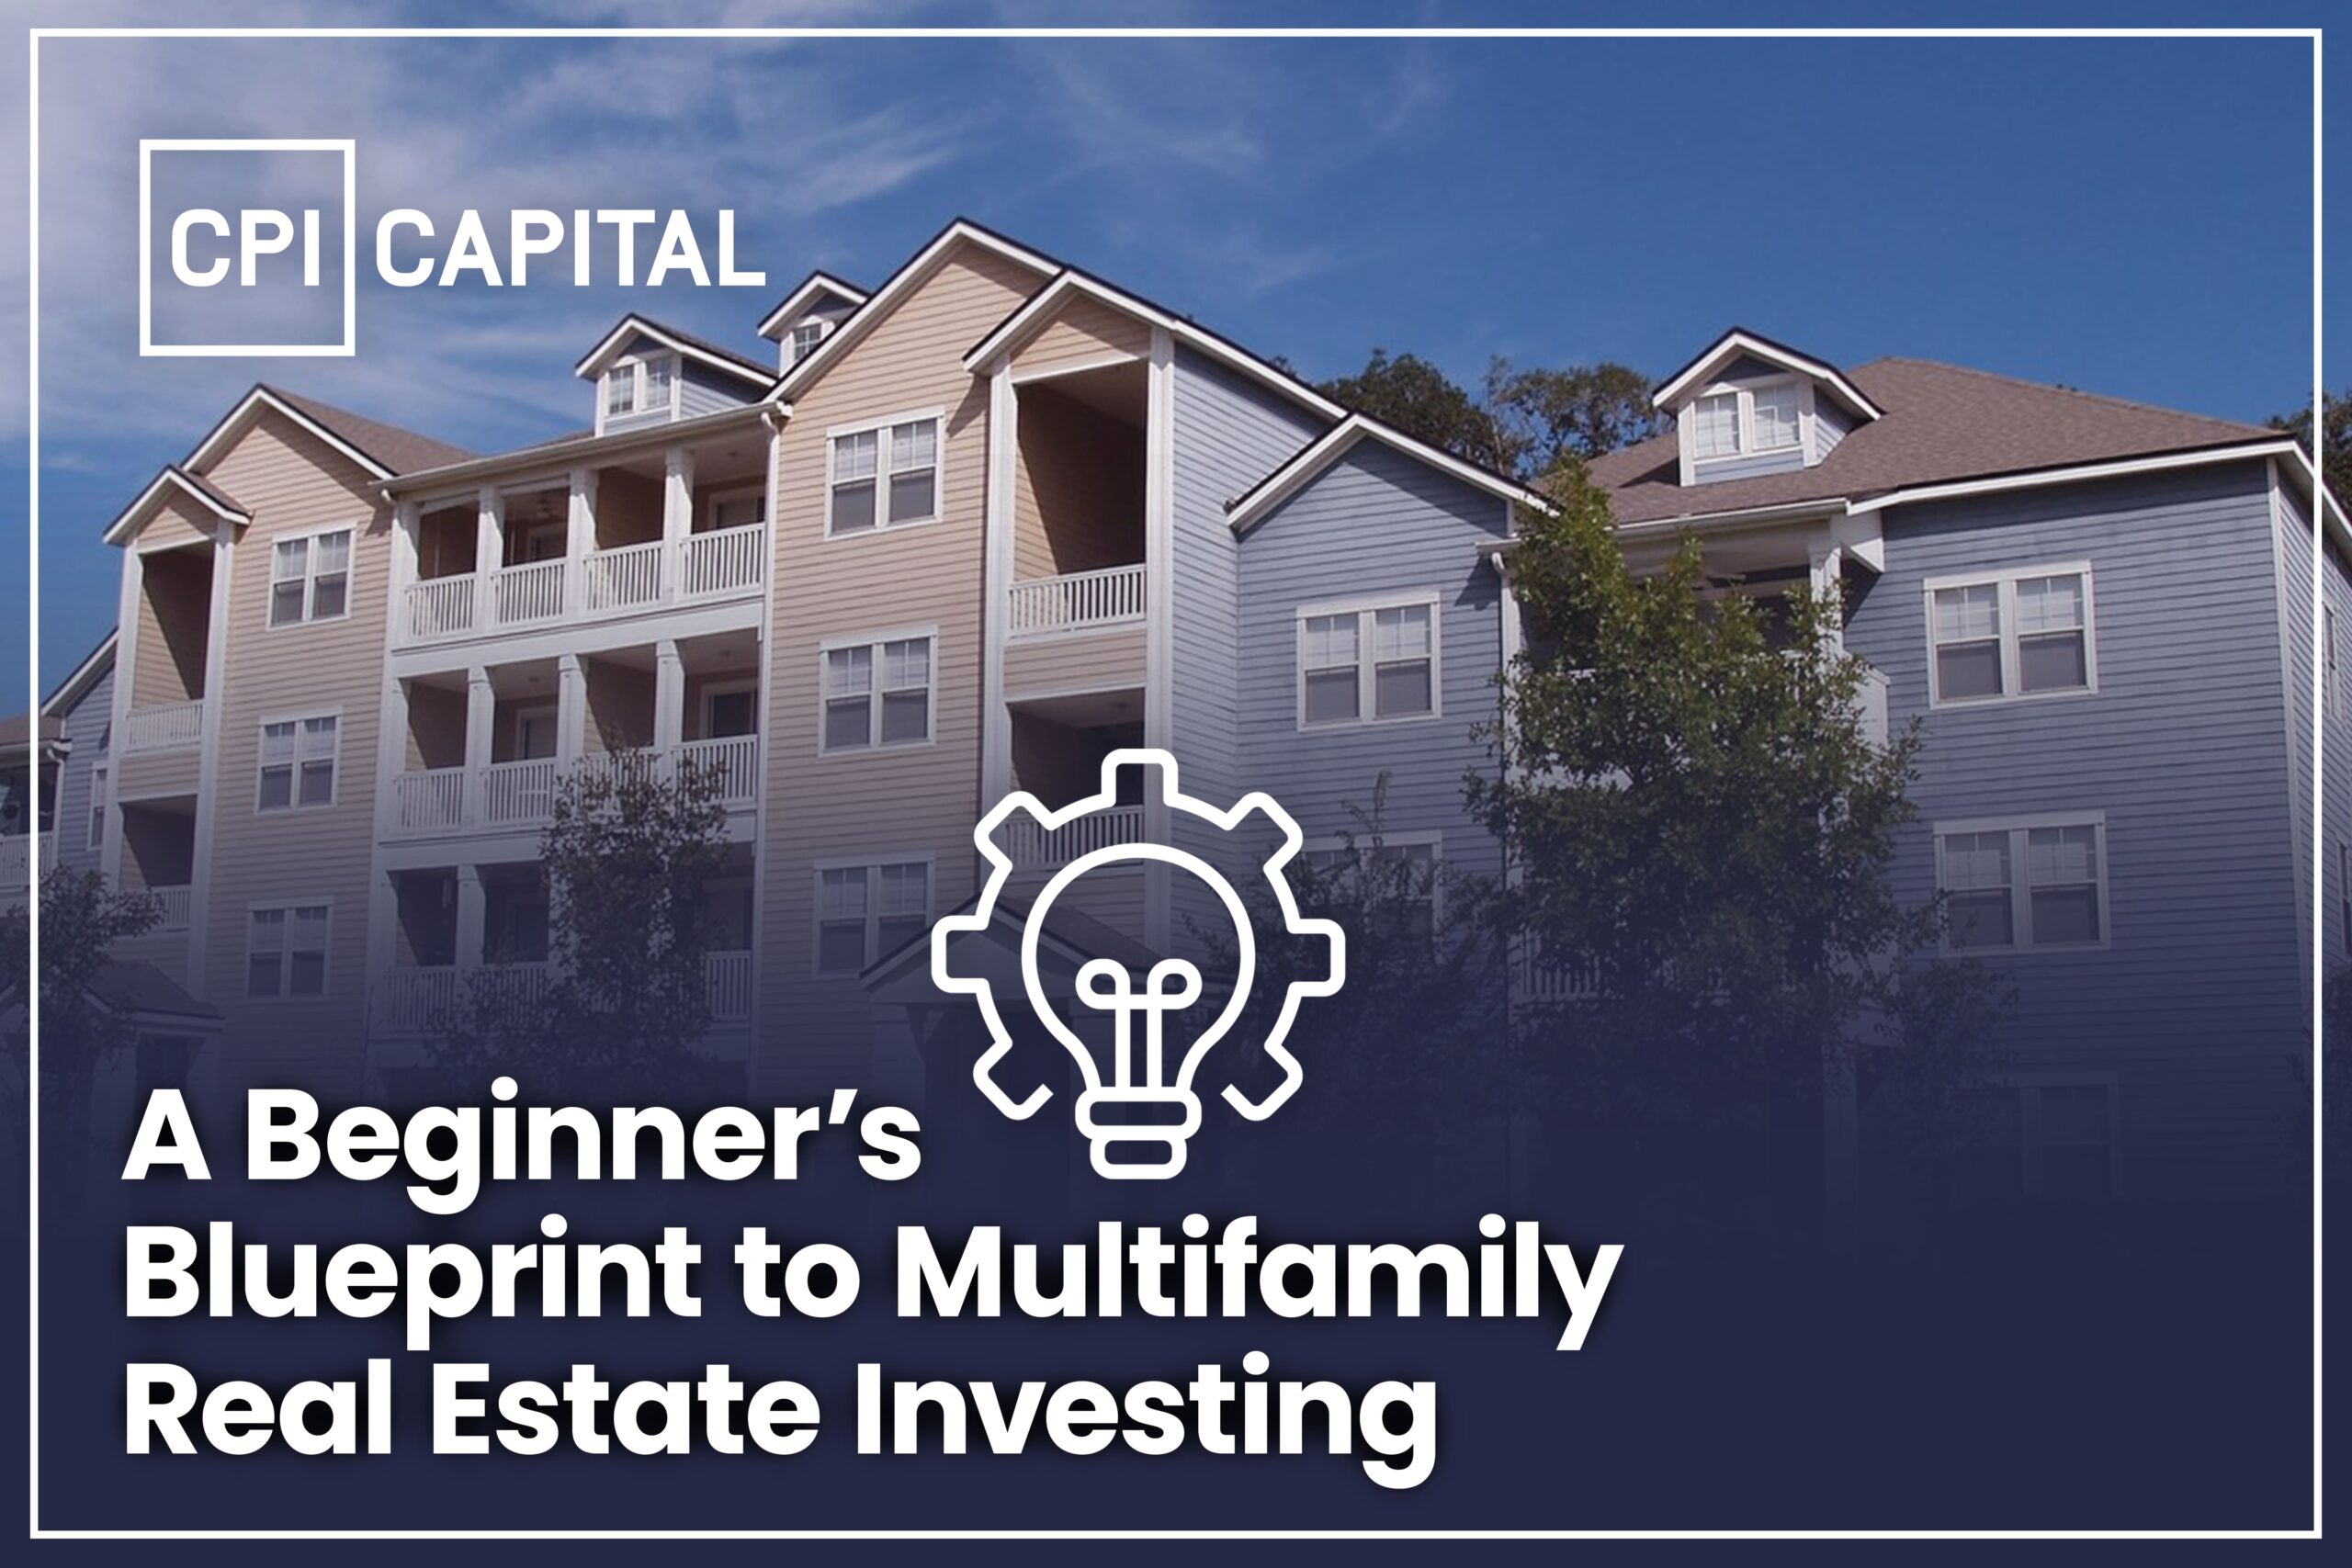 Blueprint to Multifamily Real Estate Investing